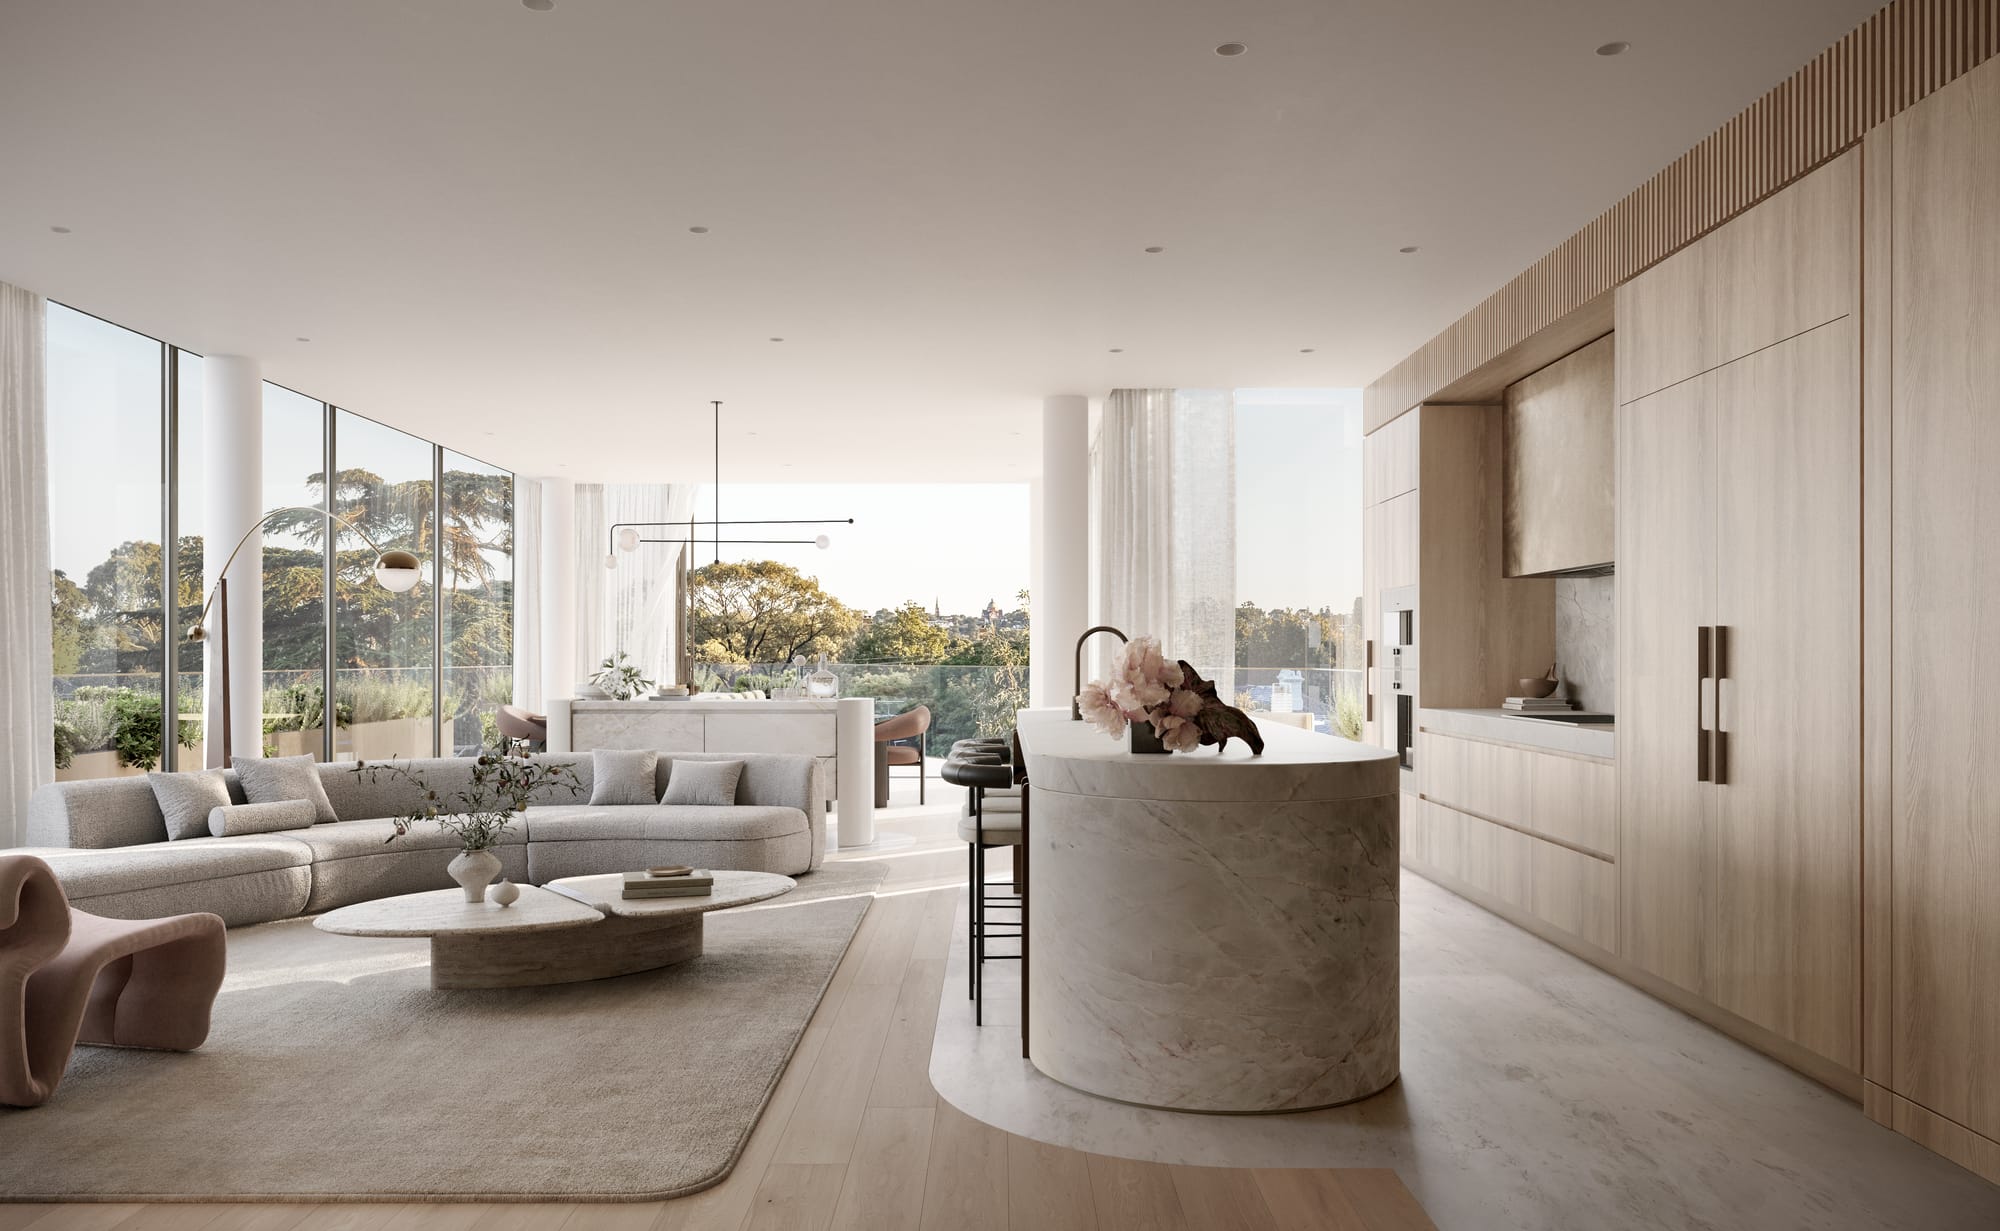 Sculpt Hawthorn by Mim Design, Parallel Workshop and Jack Merlo. Render copyright of Studio Piper. Open plan living kitchen, living and dining room. Floor-to-ceiling views. Timber floors. 